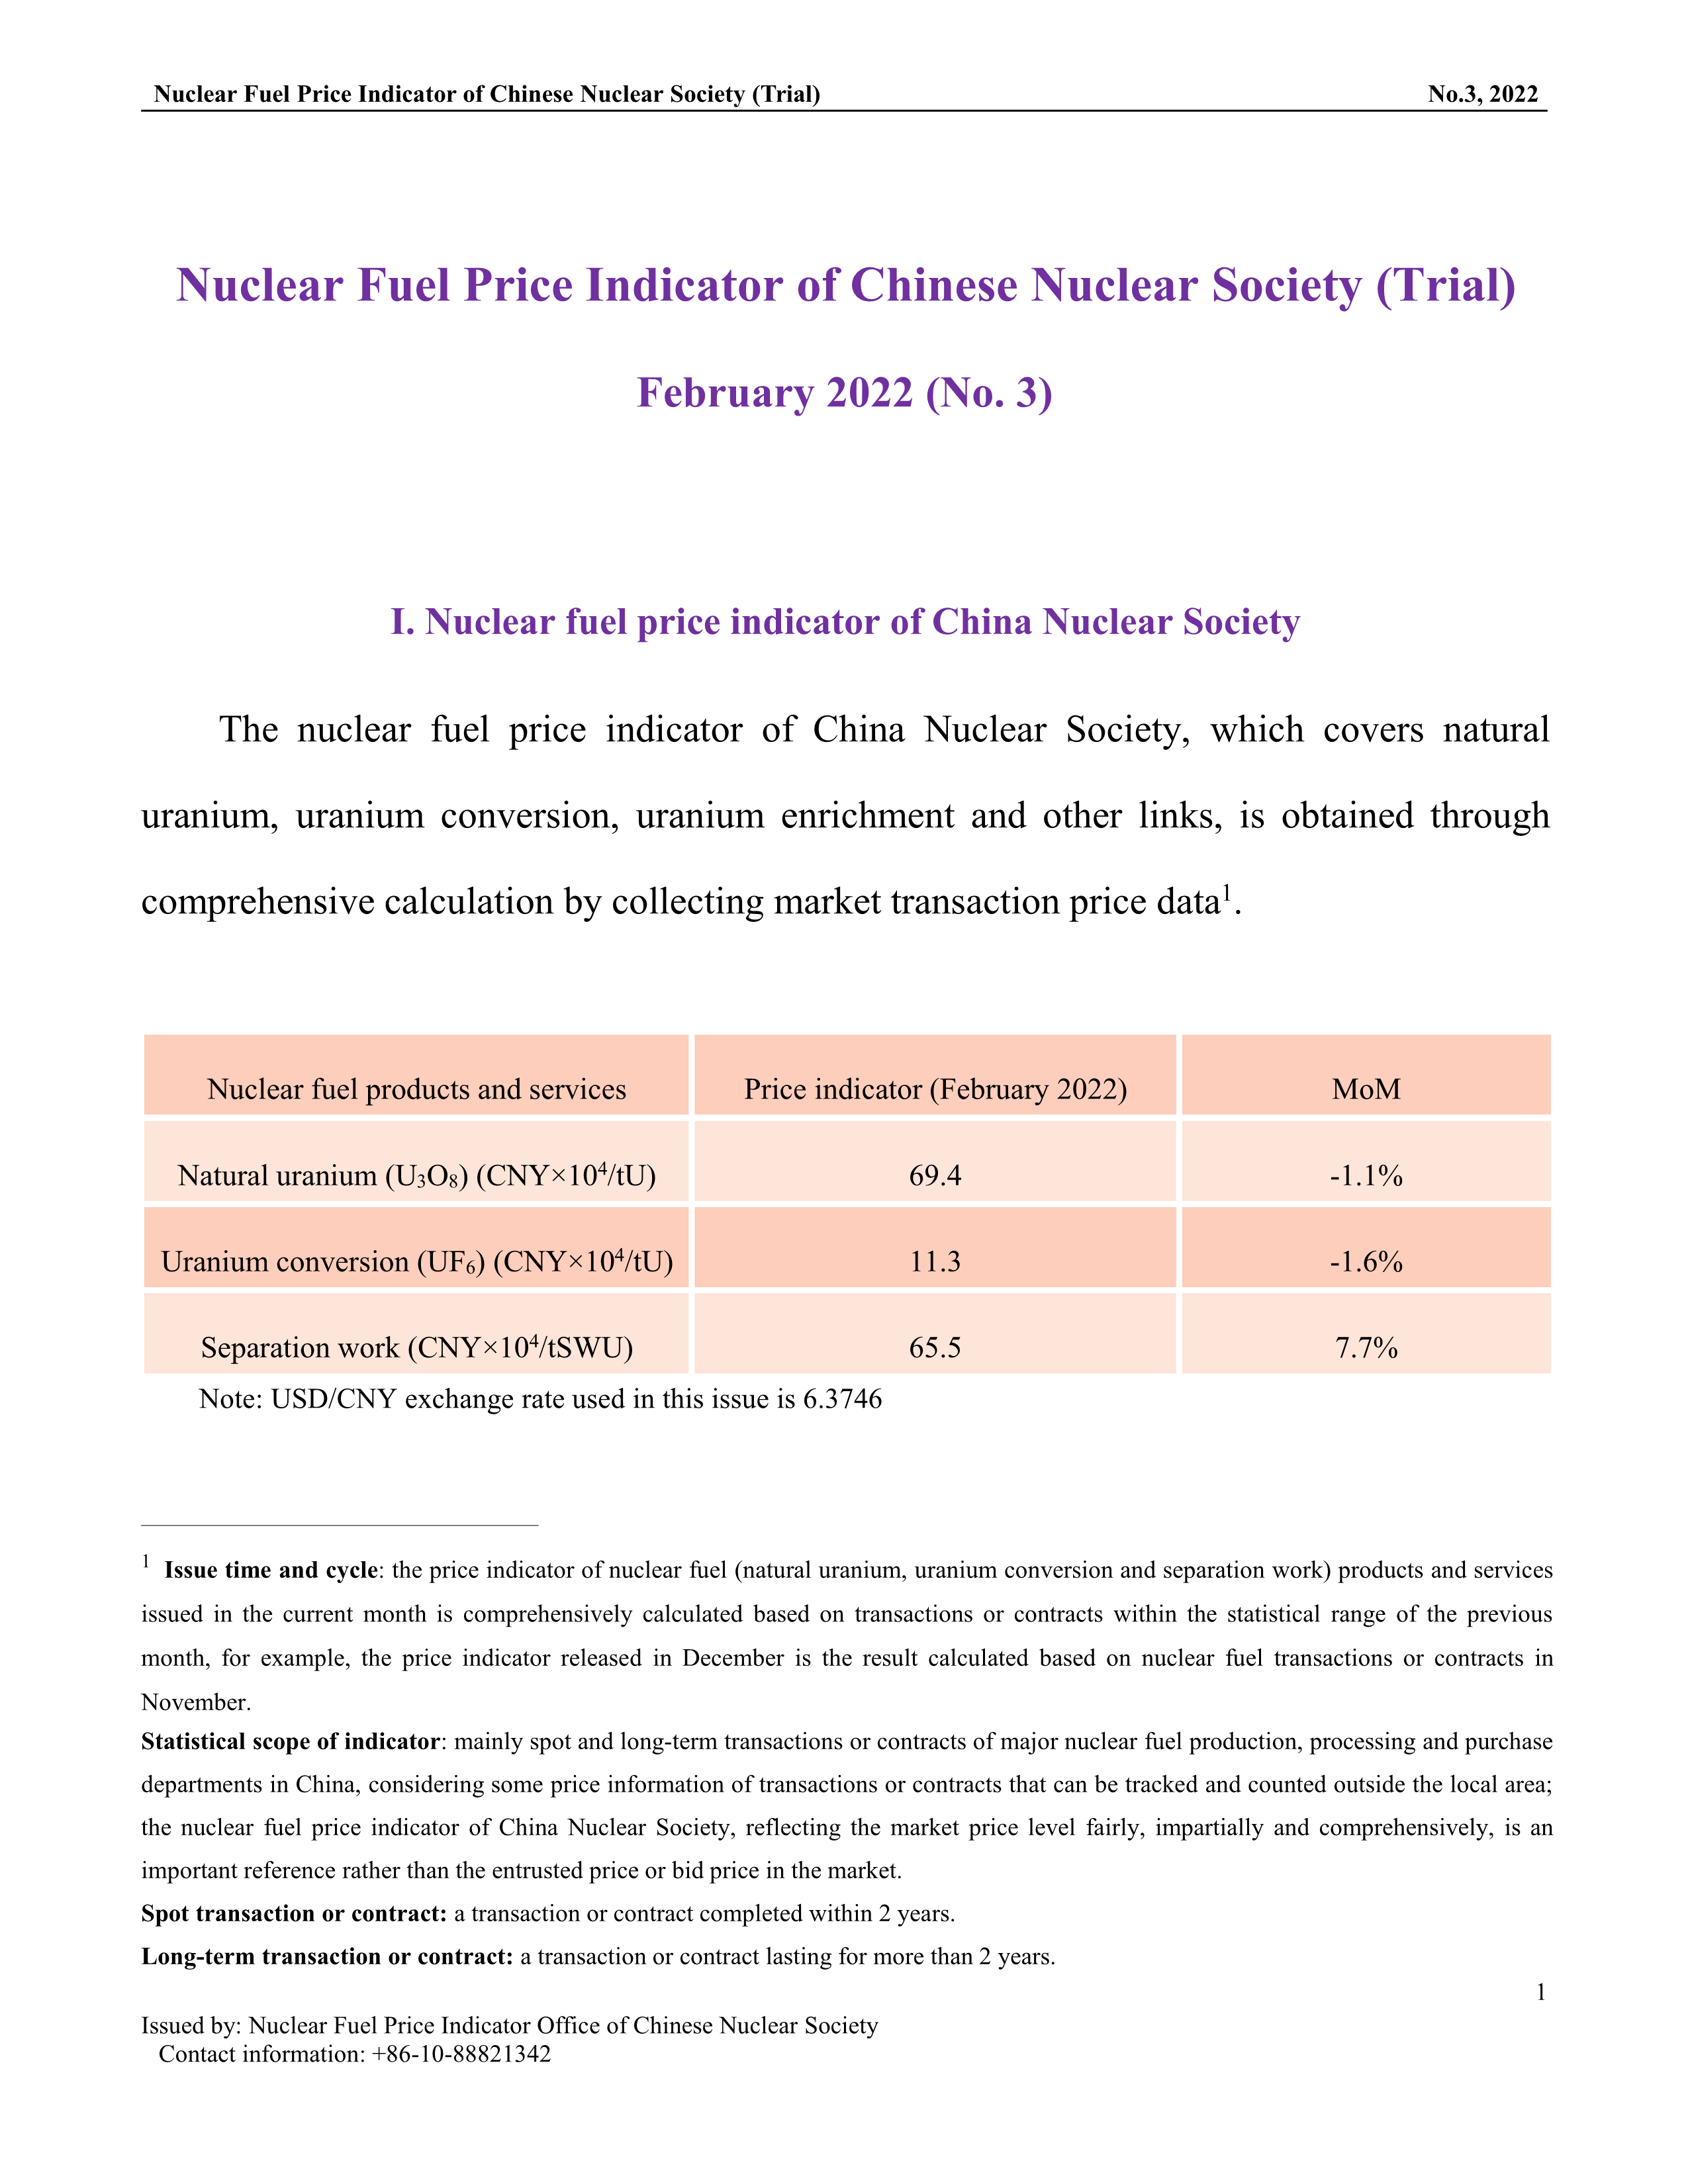 Nuclear Fuel Price Indicator of Chinese Nuclear Society (Trial)-February 2022 (No. 3)-1.png